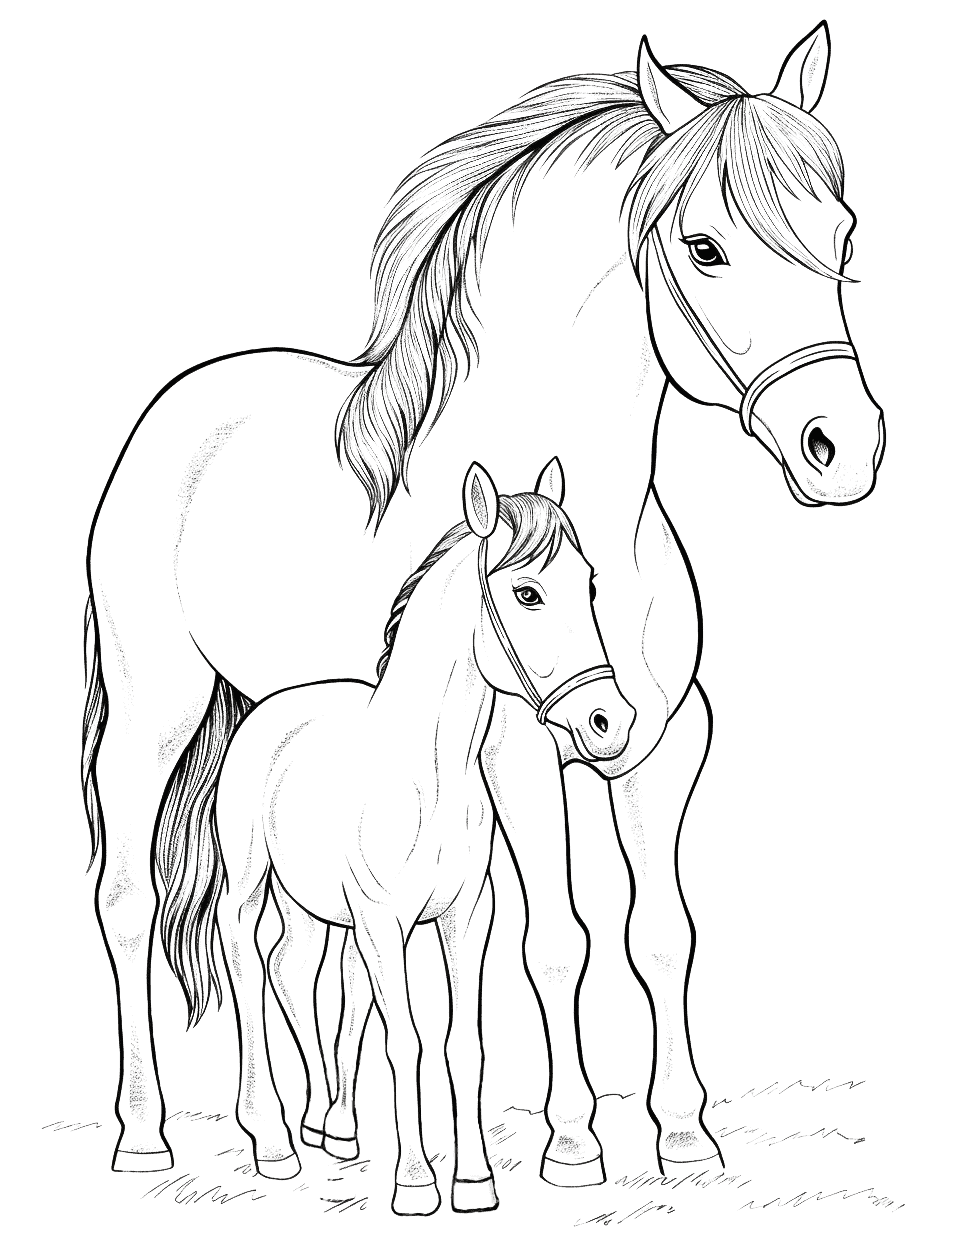 Baby Horse with Mother Coloring Page - A touching scene of a baby horse or foal staying close to its mother.